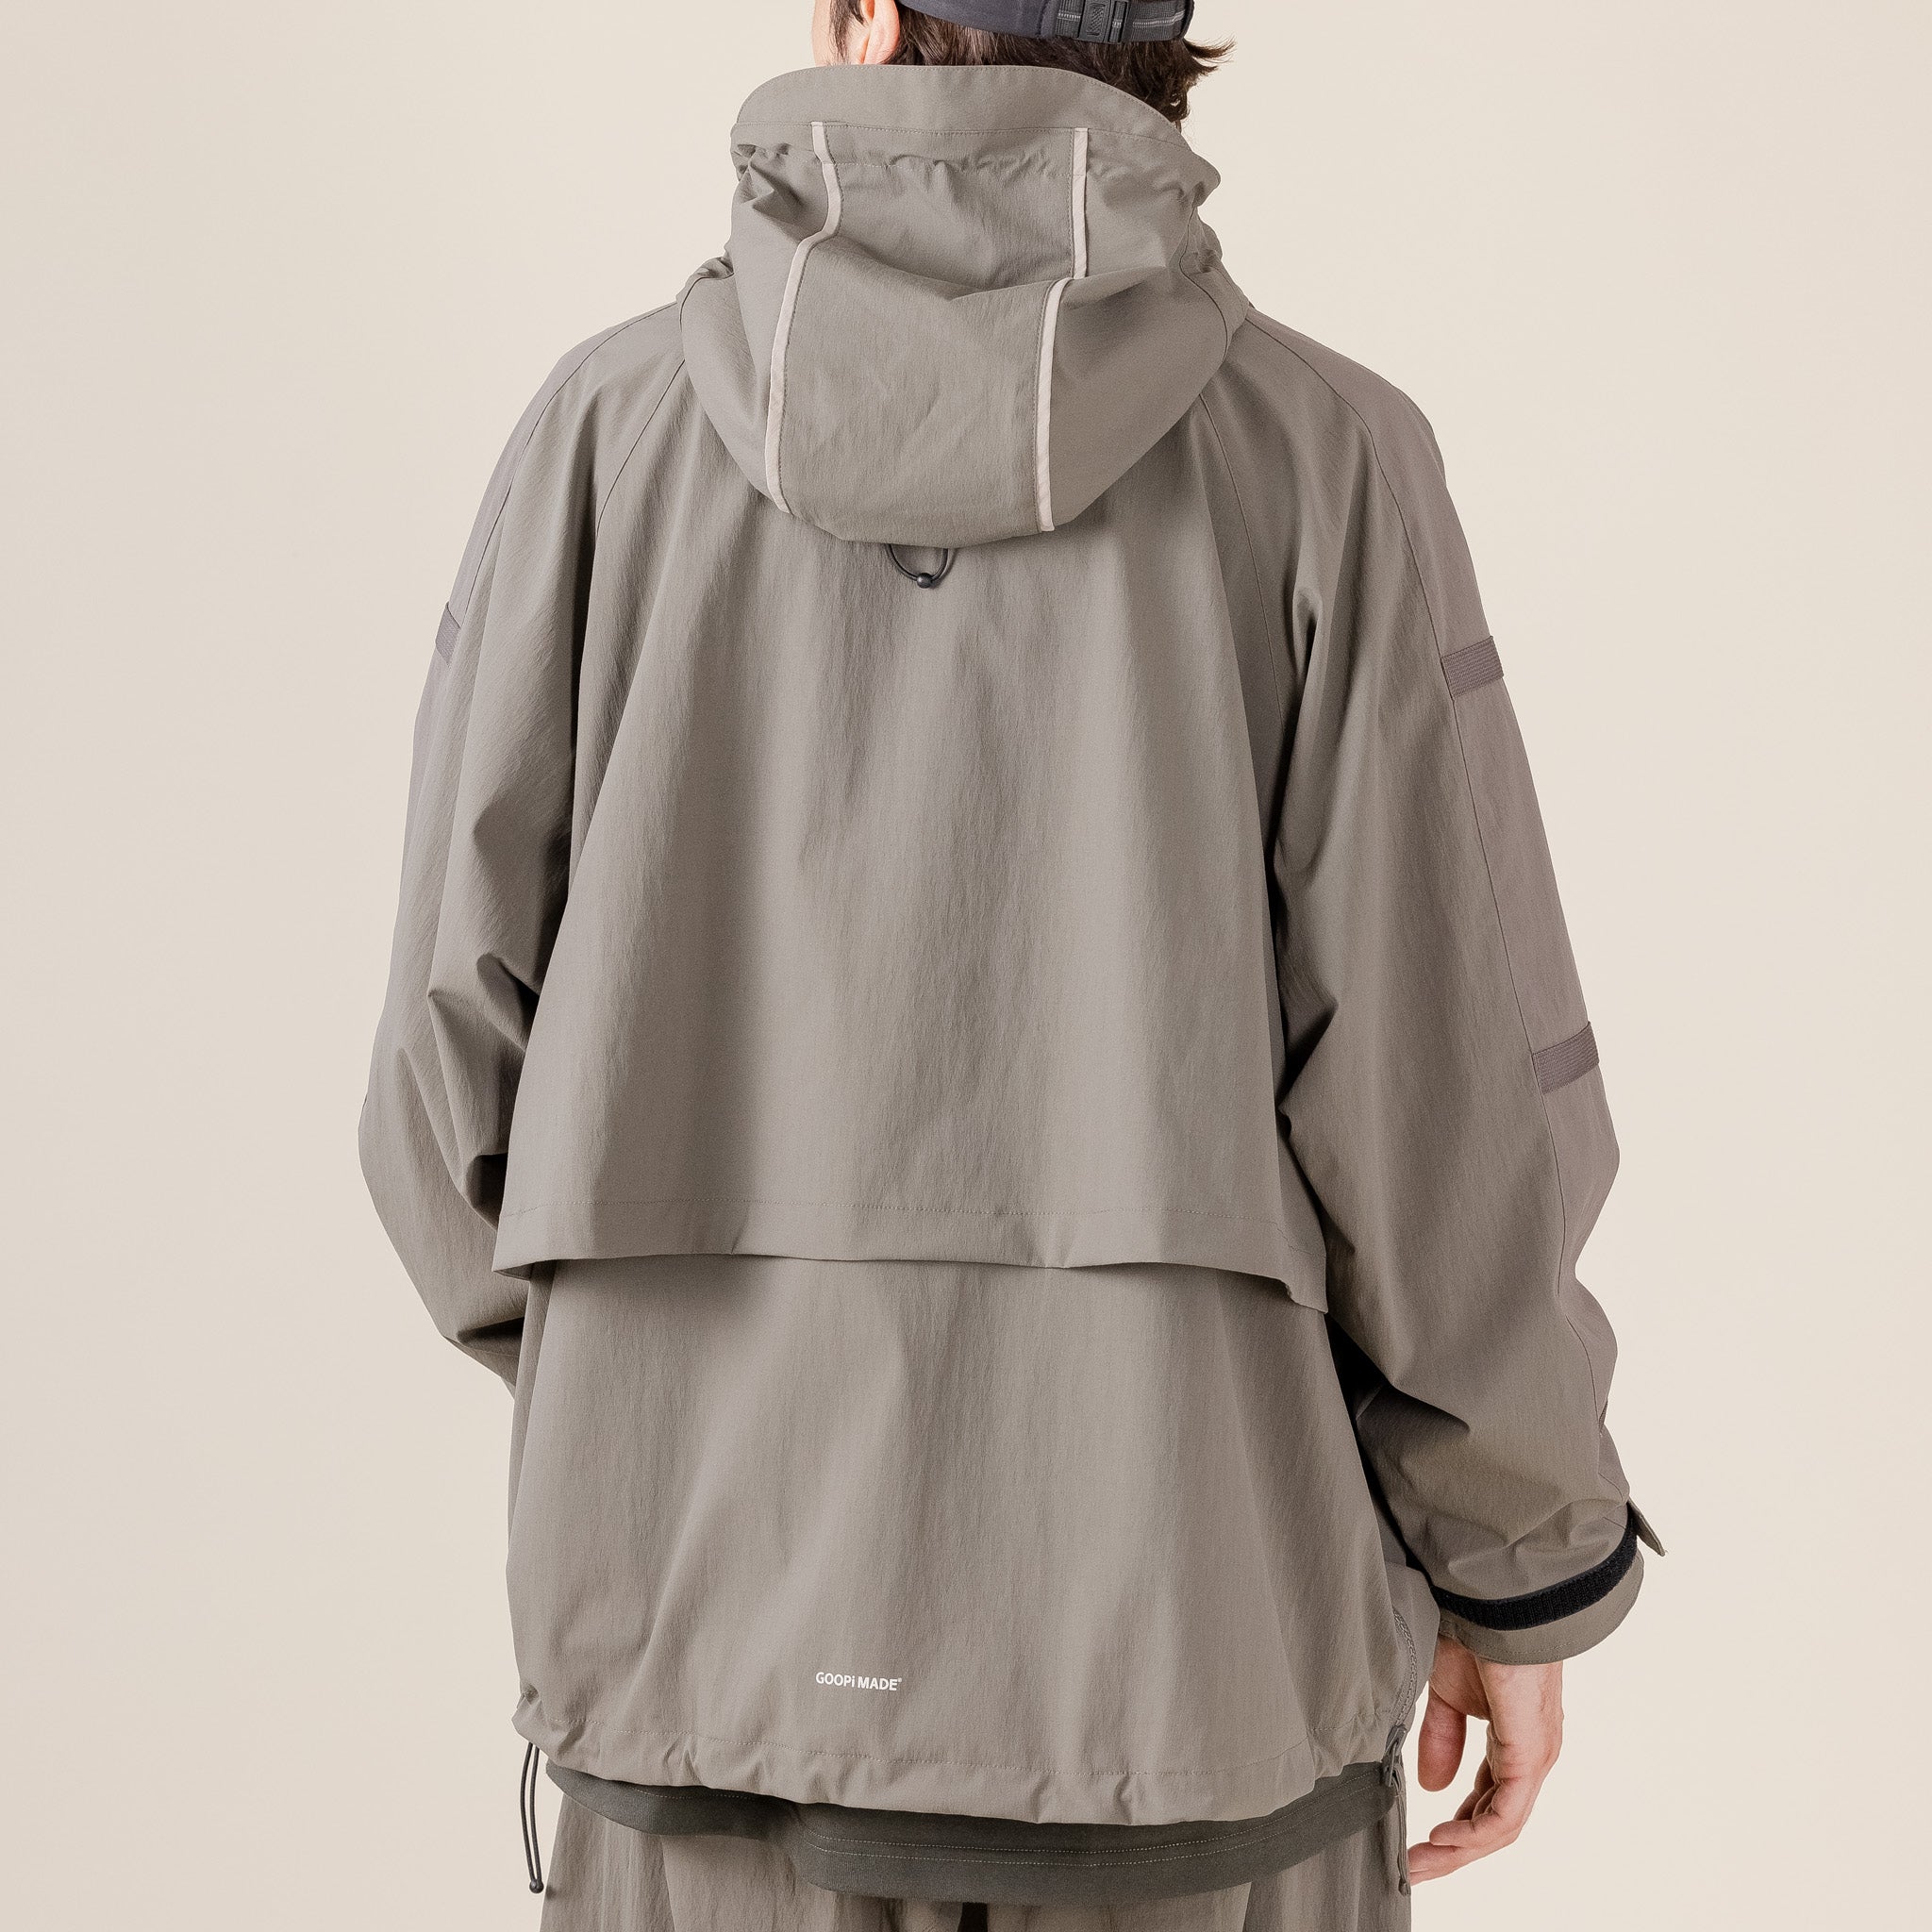 GOOPiMADE X TTOO - “Gof-A3” Tech-Meander Pullover Jacket - Sage "goopimade this thing of ours" "goopimade TTOO collaboration"